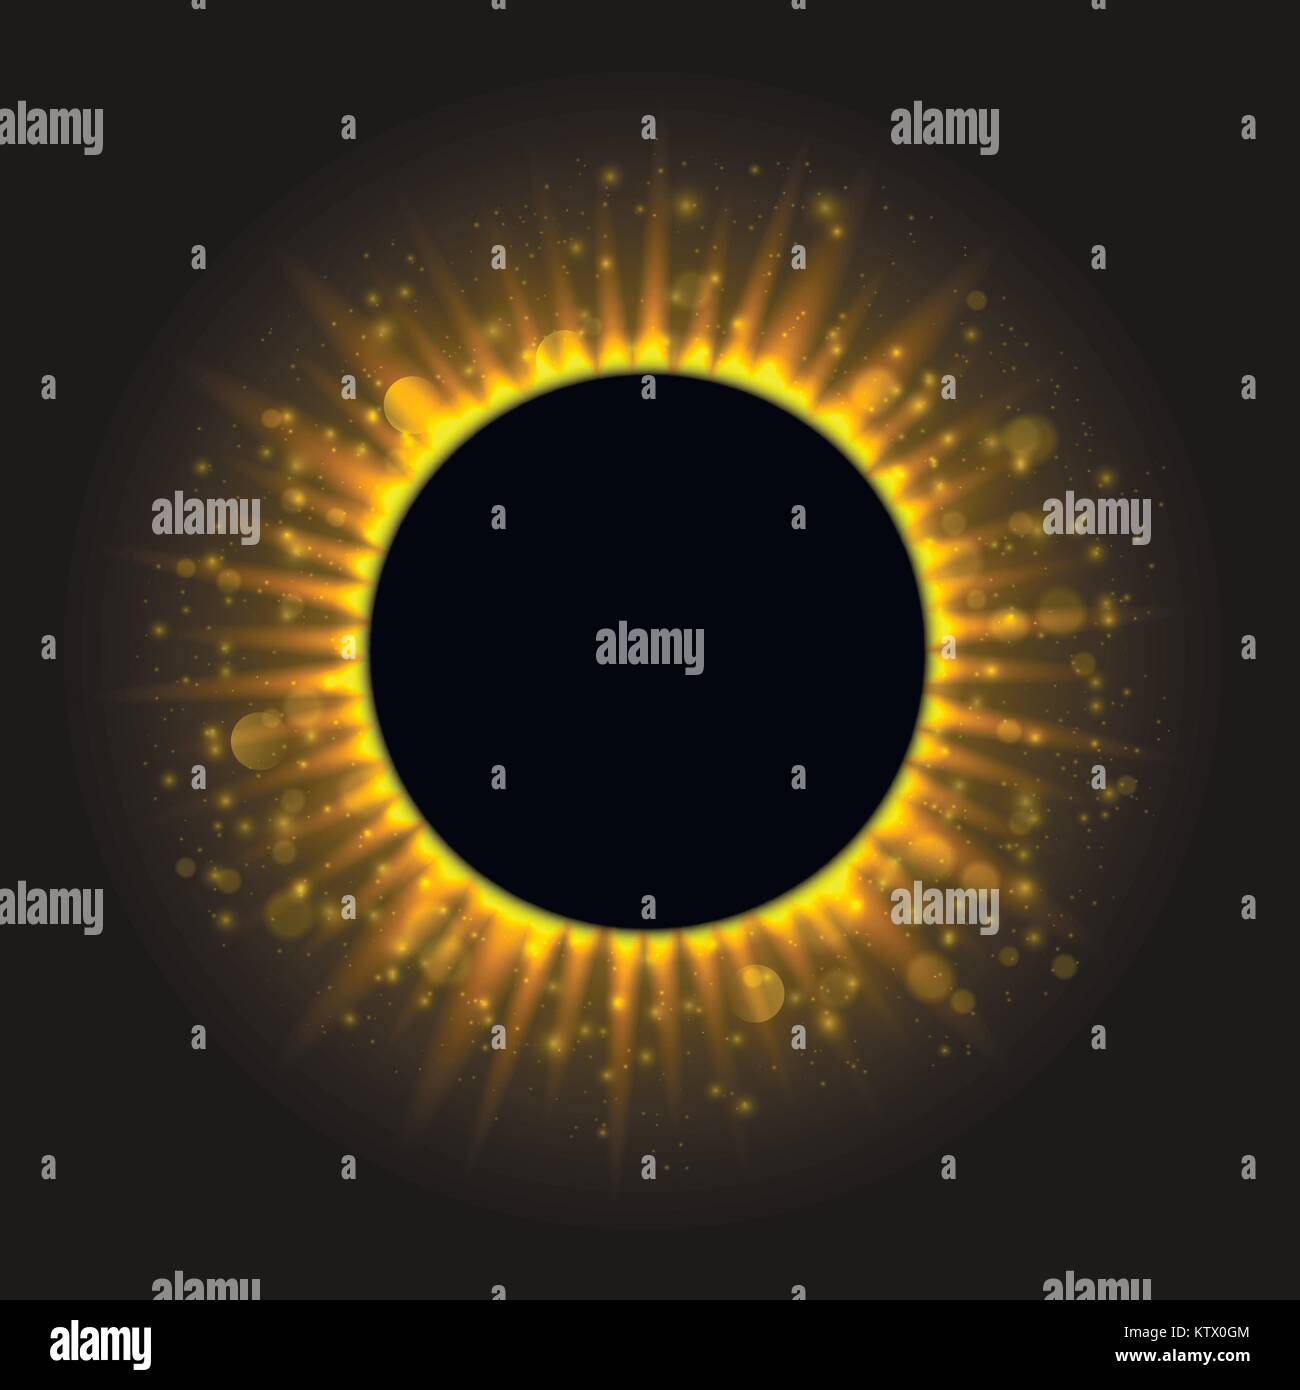 Eclipse of the sun Stock Vector